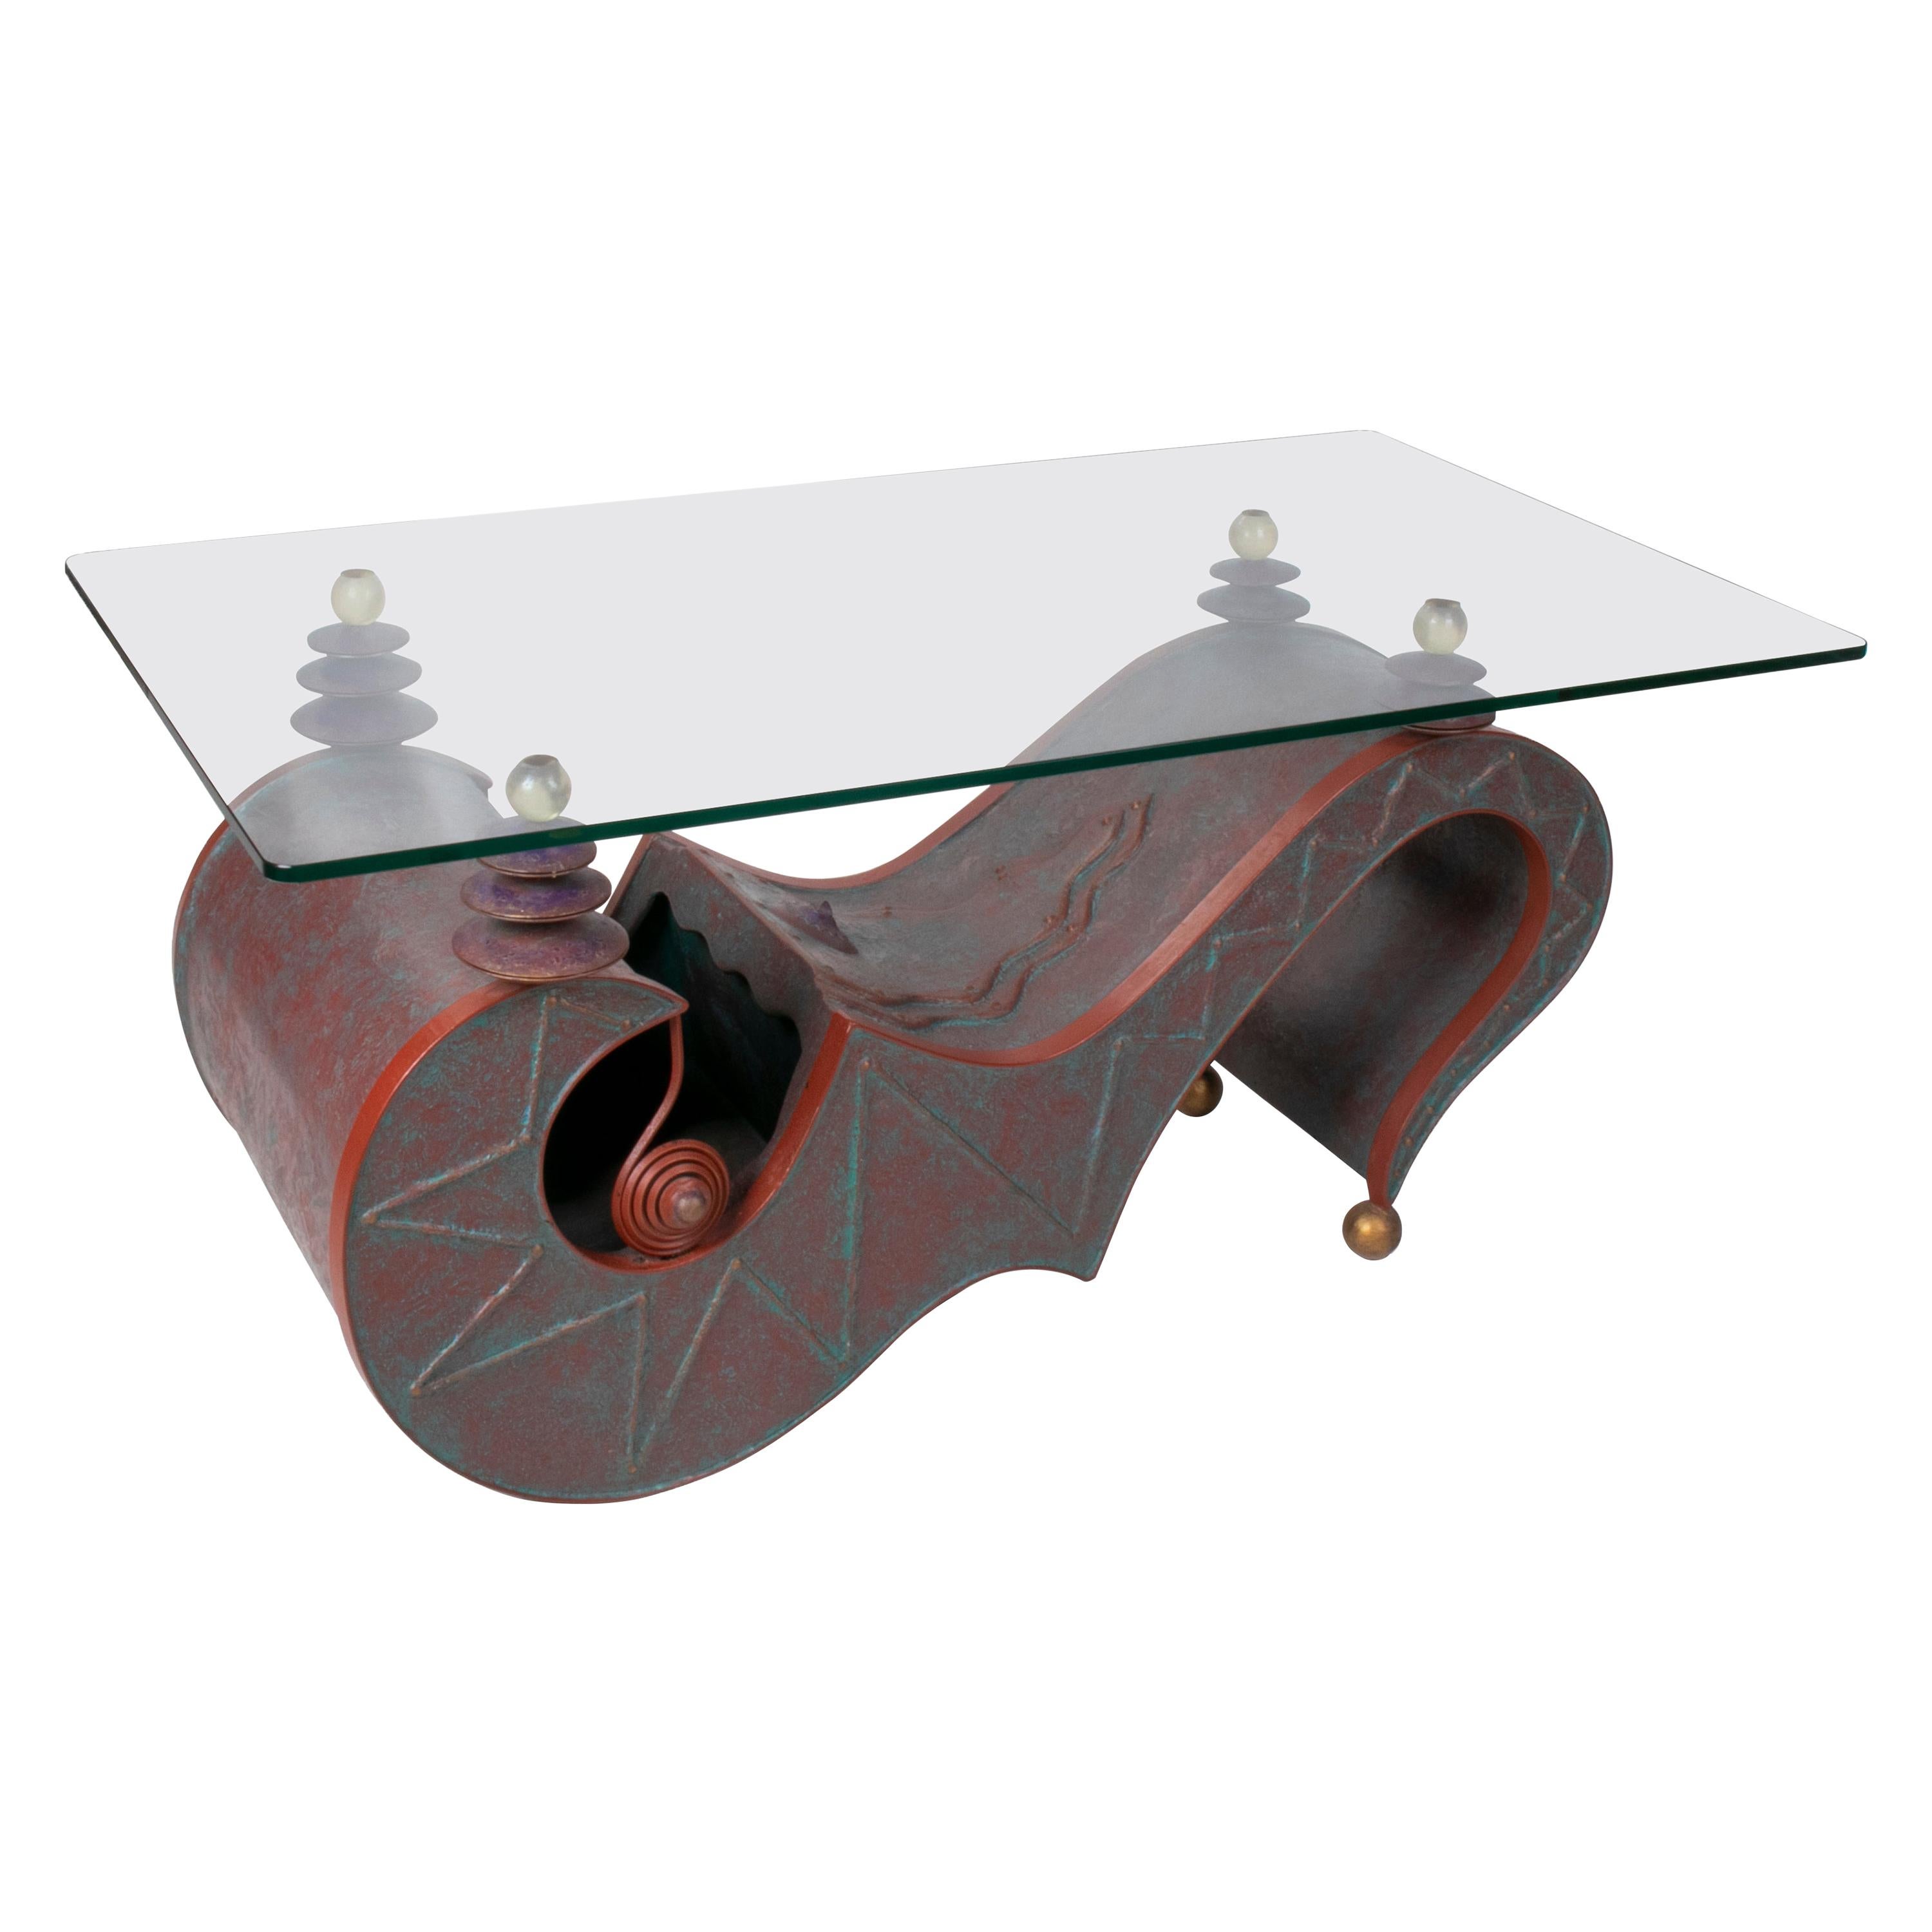 1980s German Abstract Design Iron and Glass Coffee Table For Sale